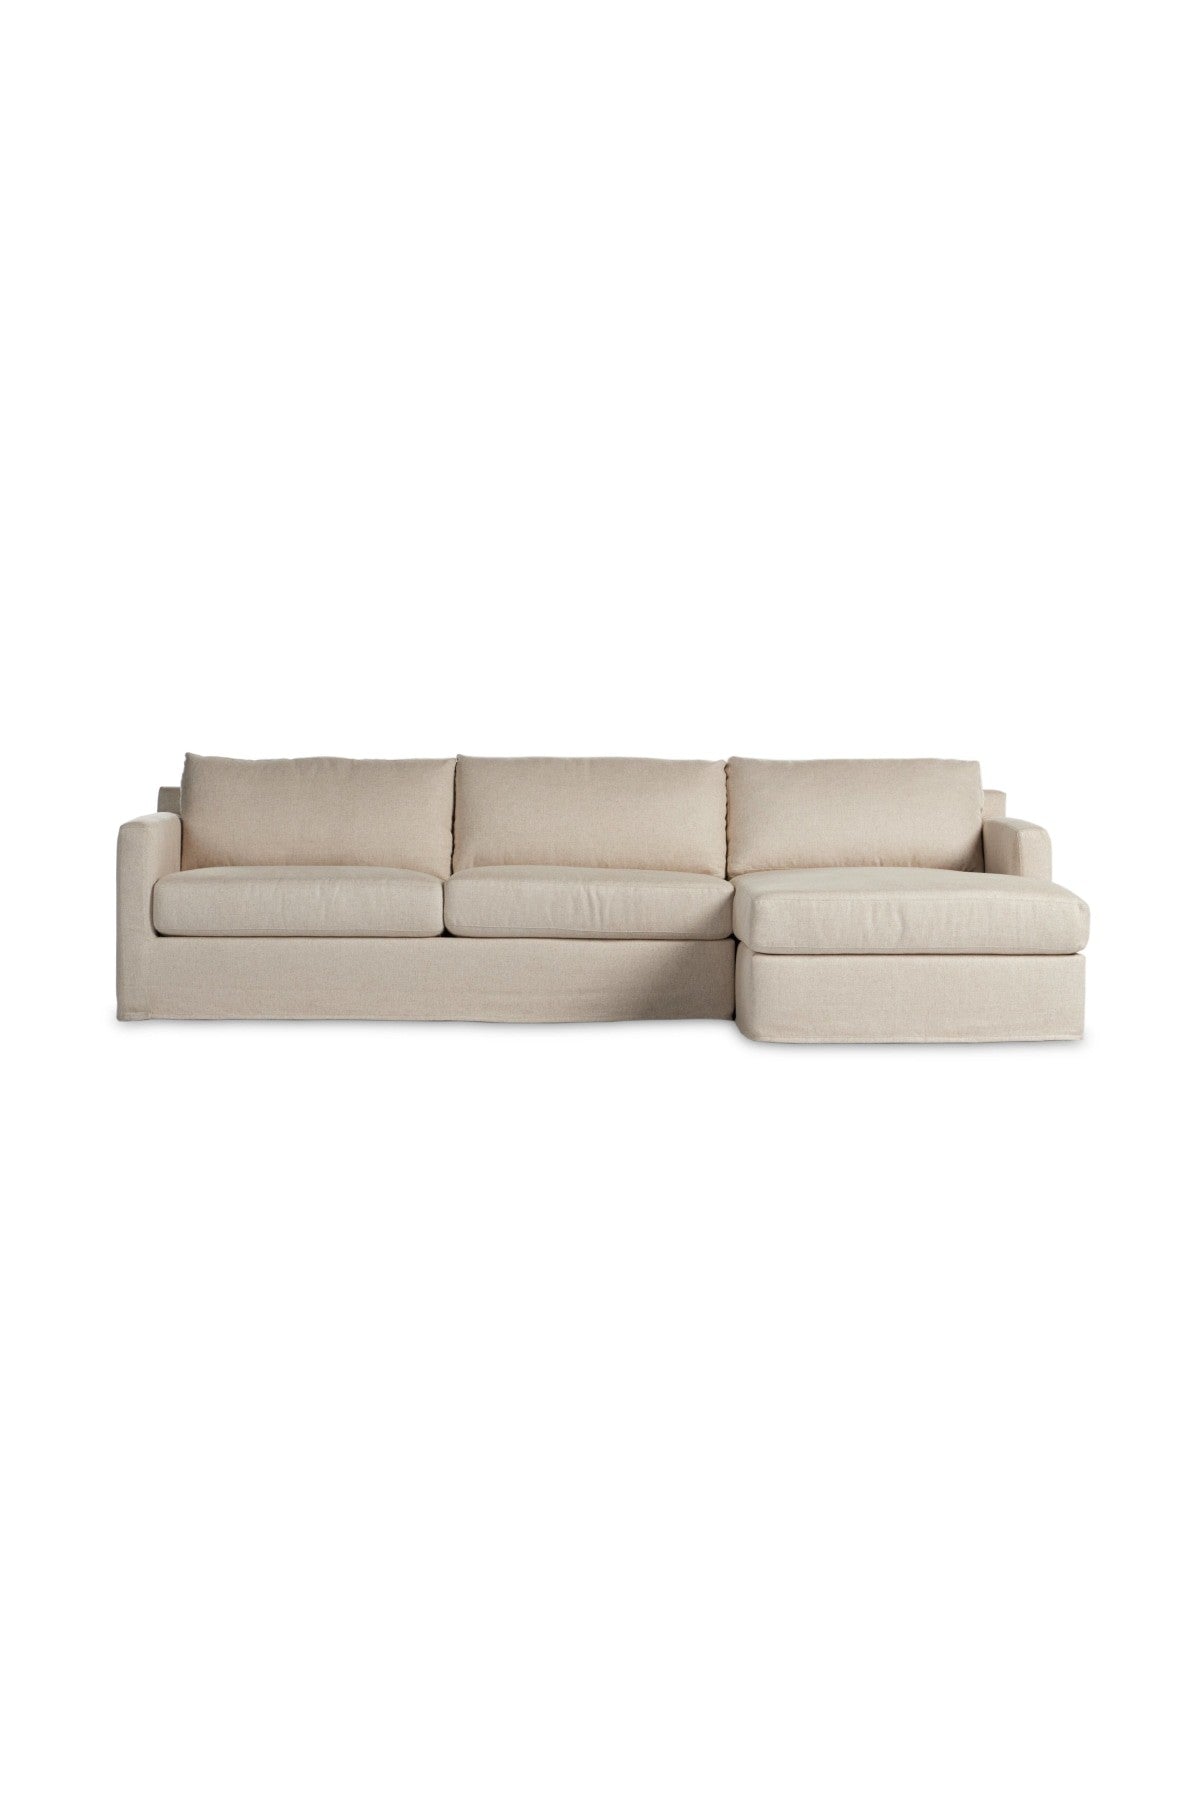 Wescott 2-Piece Slipcover Sectional - Creme - 2 Styles